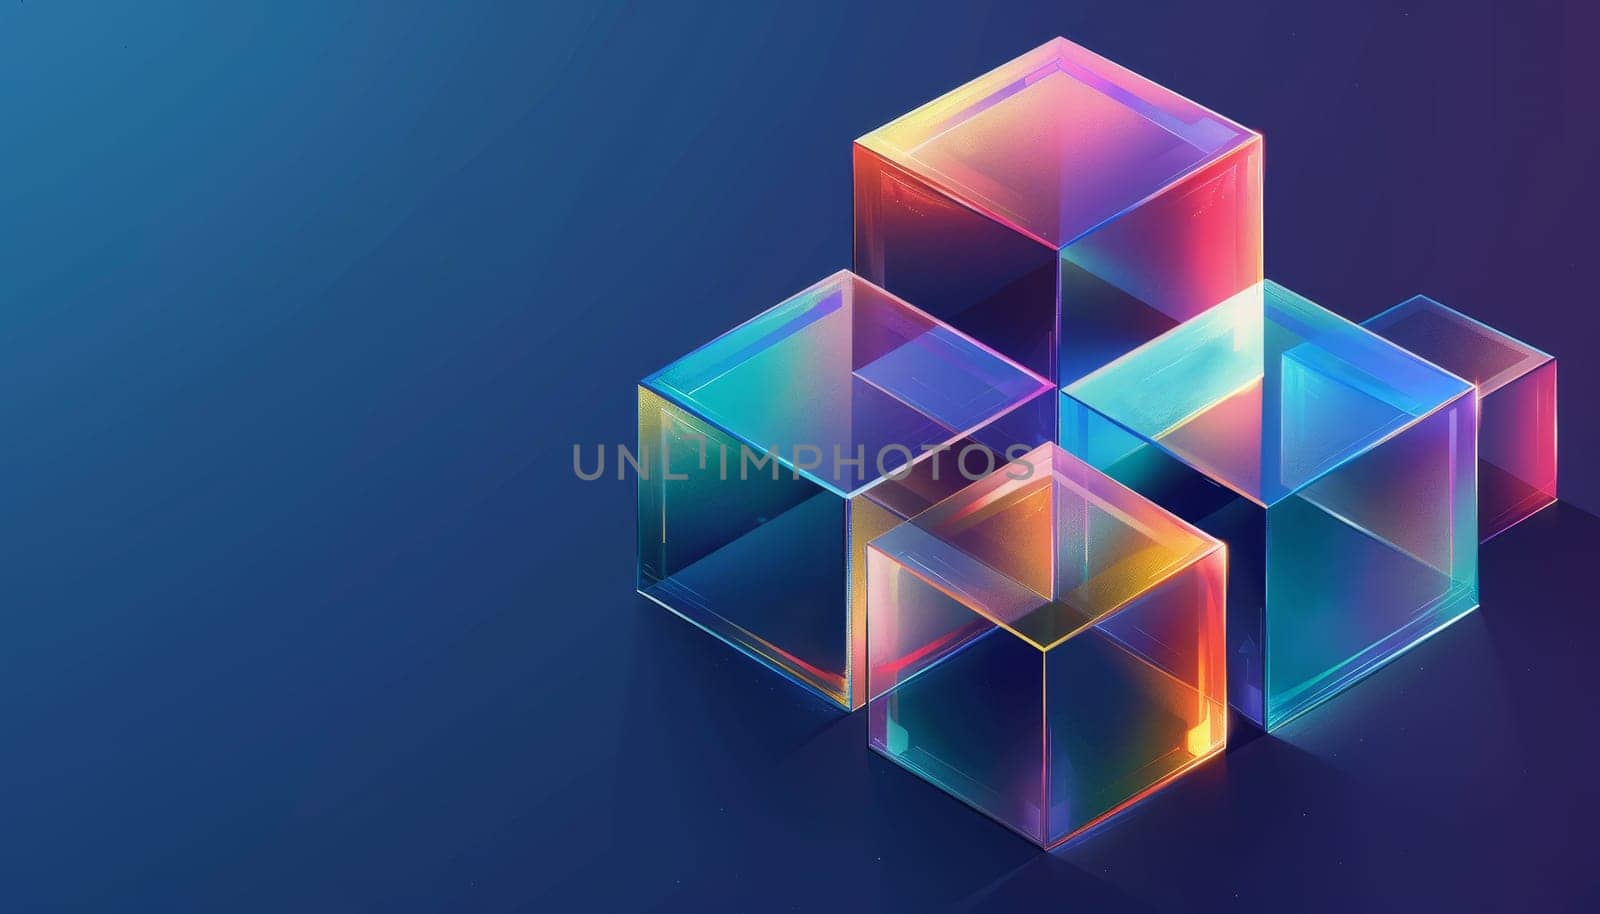 Three colorful cubes are arranged in a pyramid shape by AI generated image.